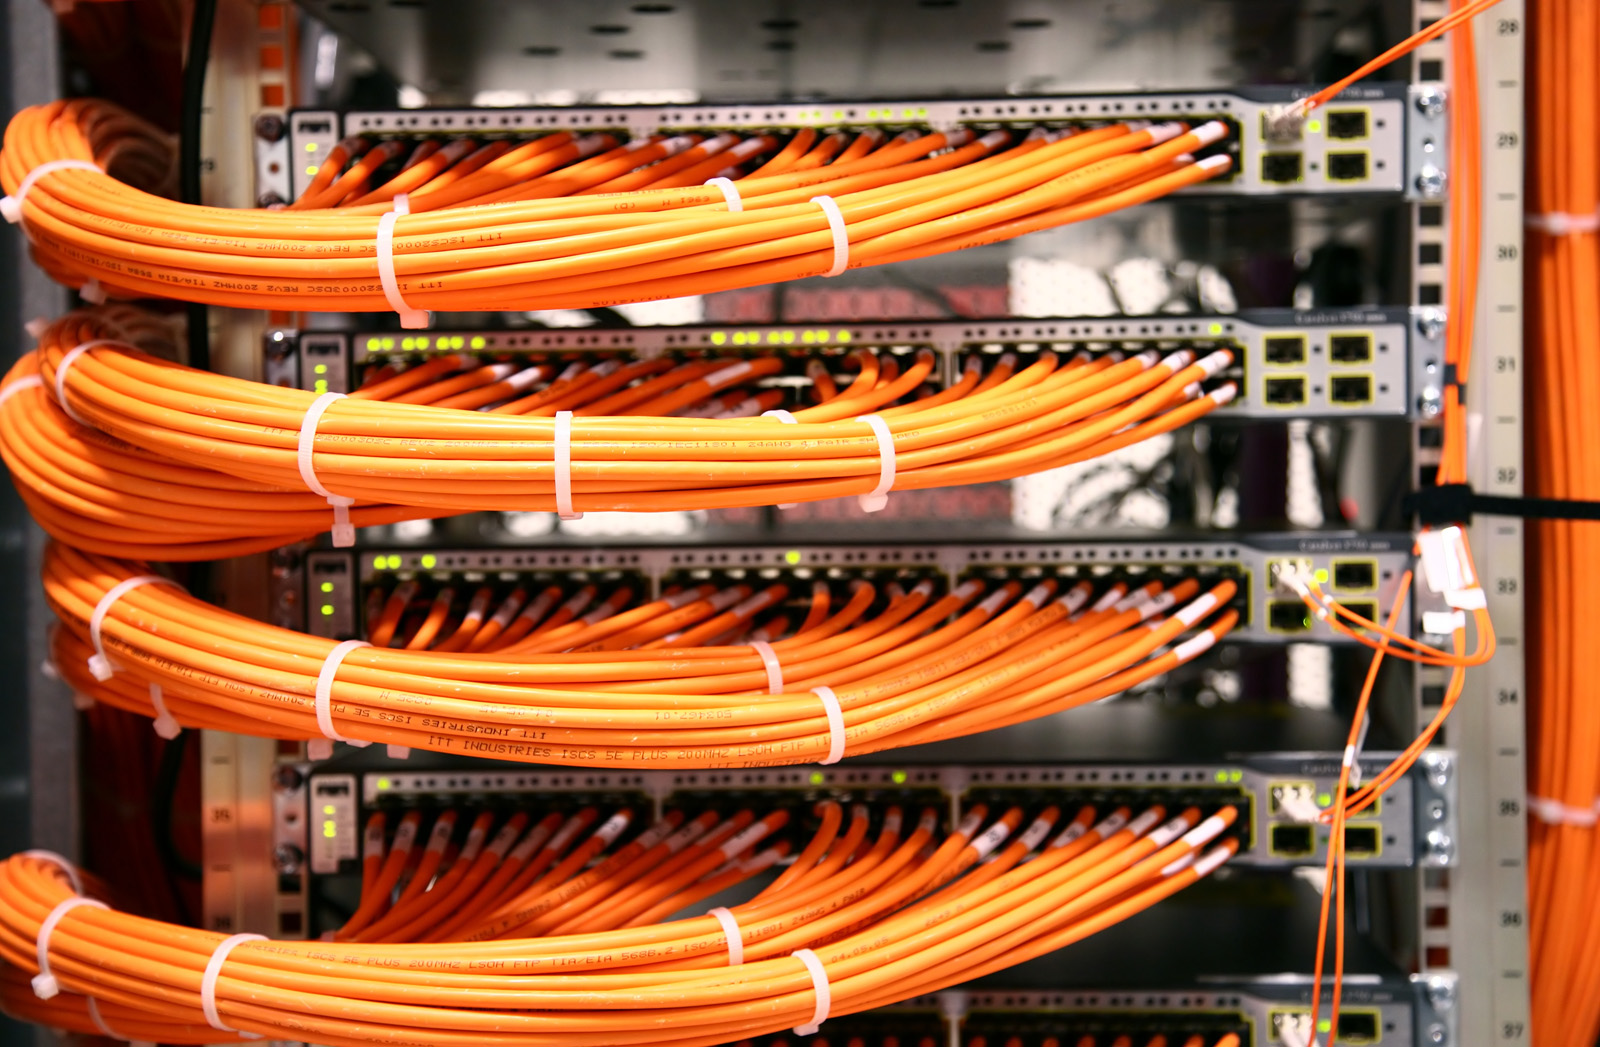 Springfield Kentucky Trusted Voice & Data Network Cabling Contractor